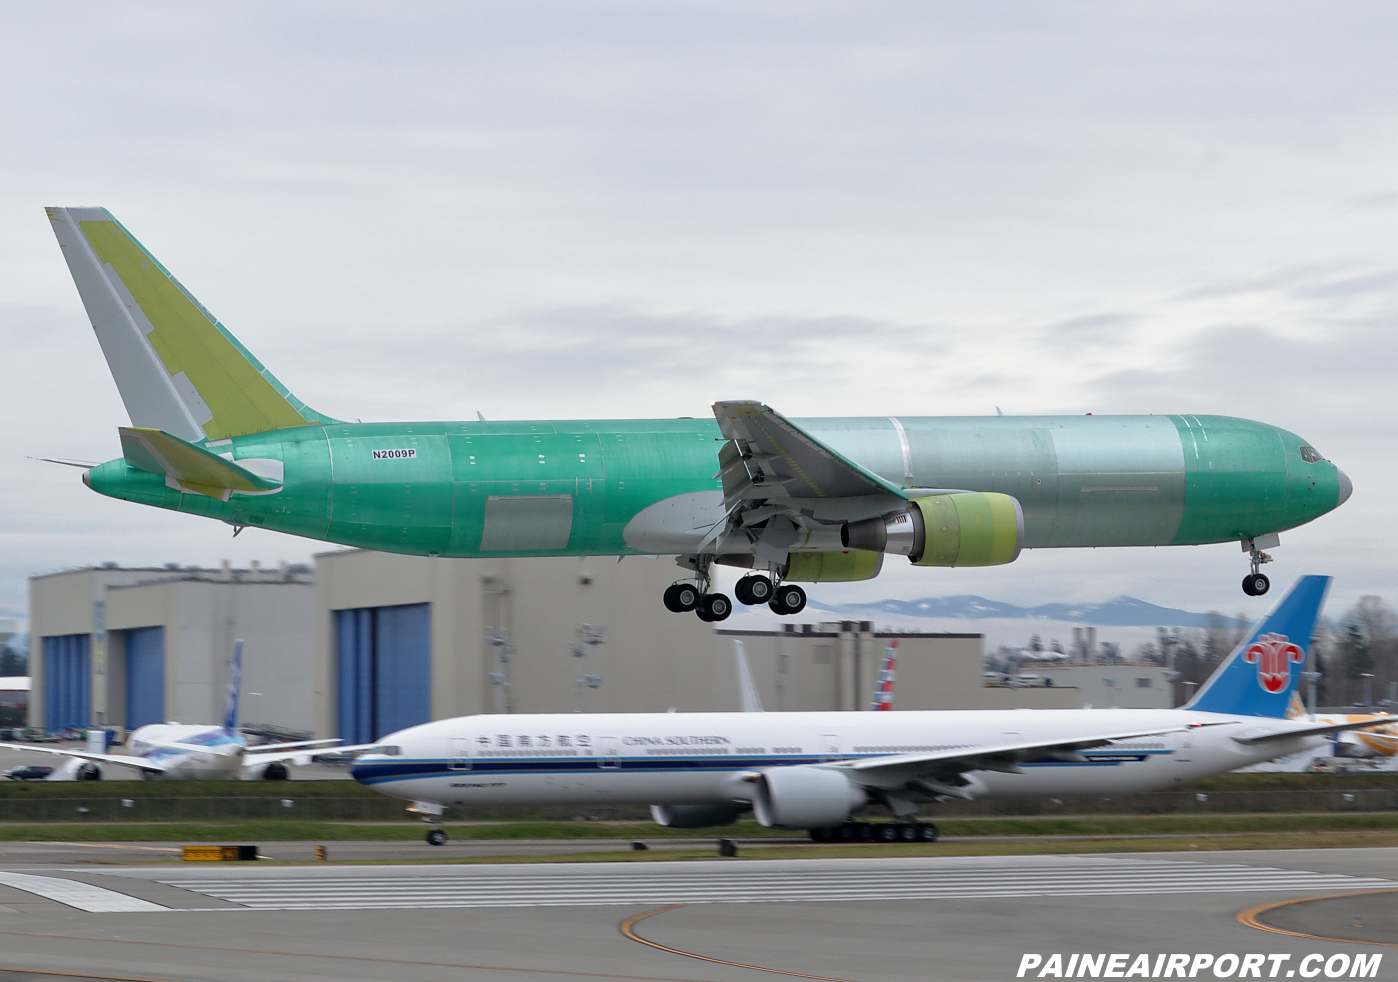 China Central Longhao 767 at KPAE Paine Field